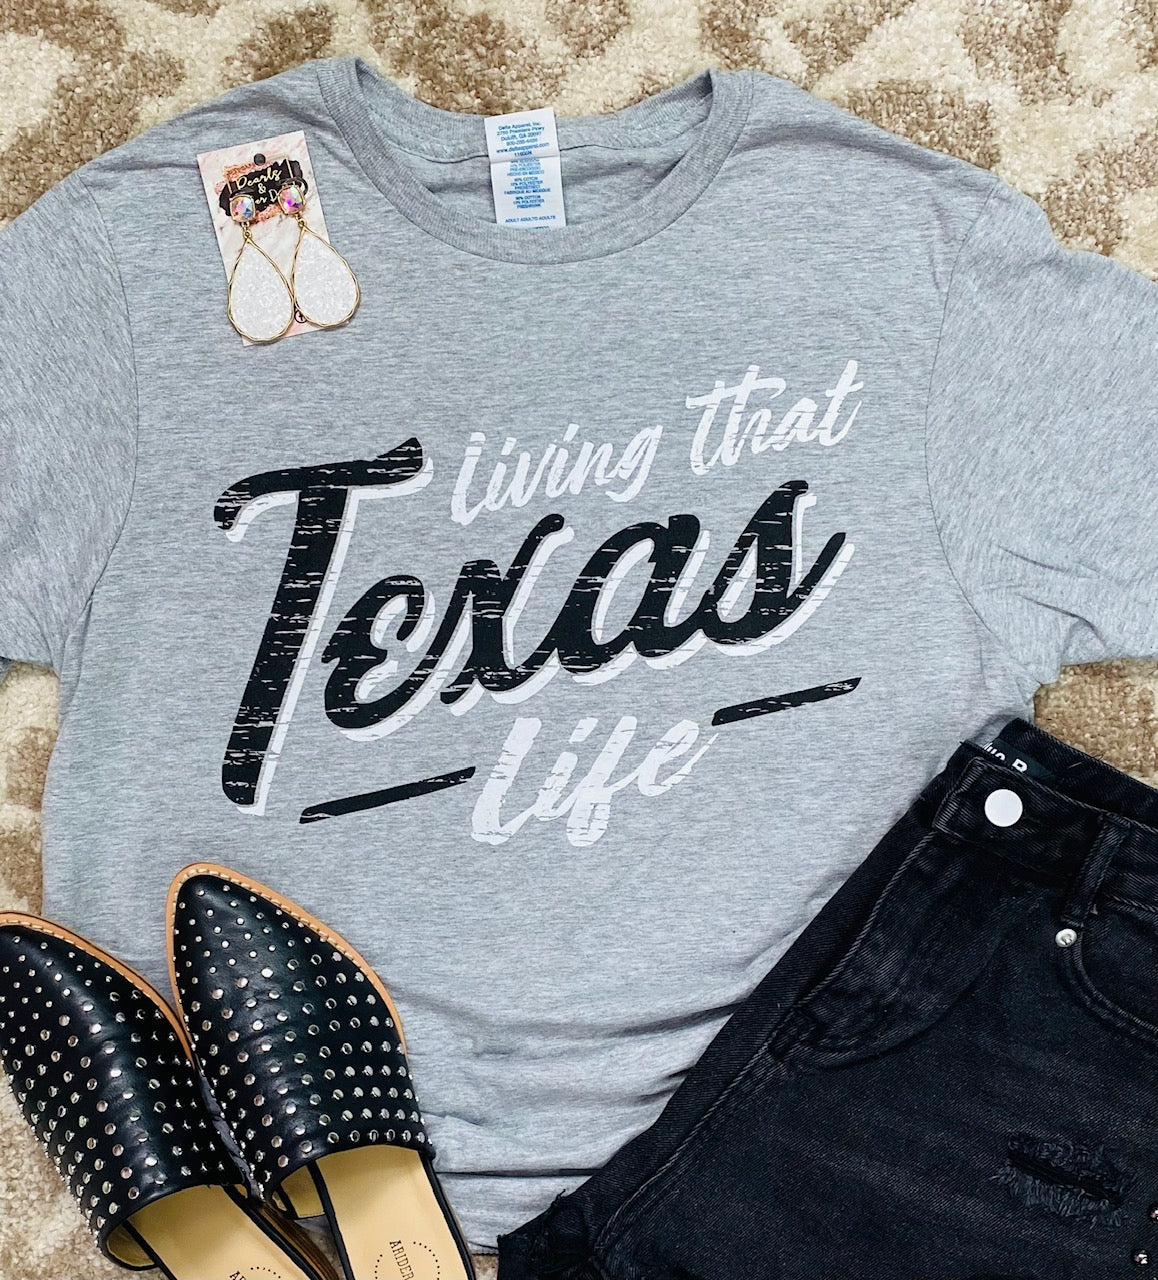 Living That Texas Life graphic tee